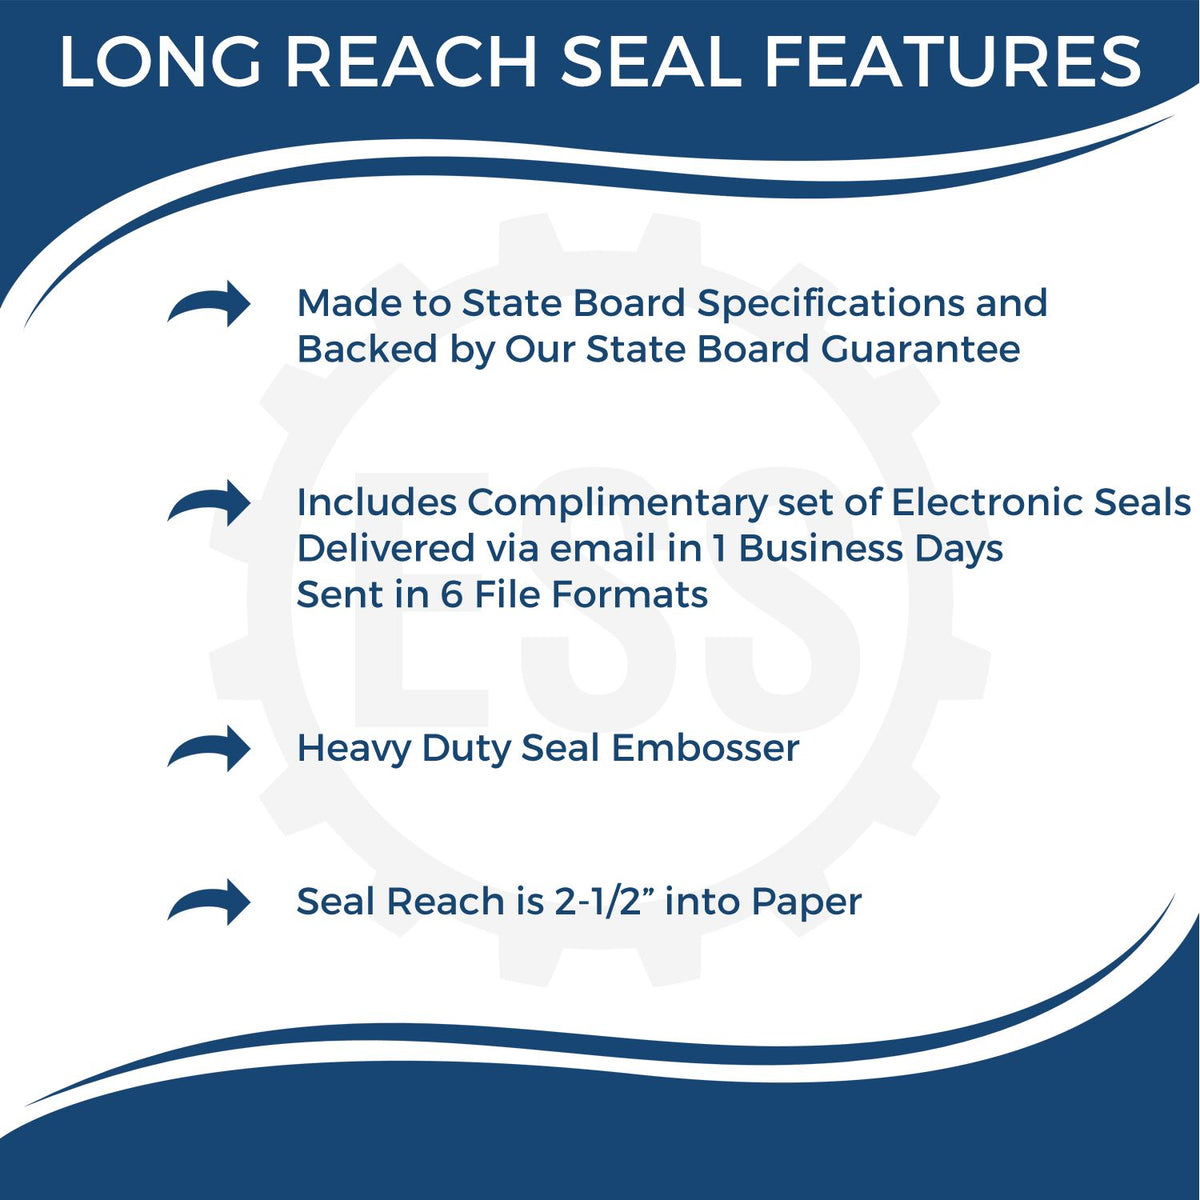 A picture of an infographic highlighting the selling points for the Long Reach Minnesota Land Surveyor Seal